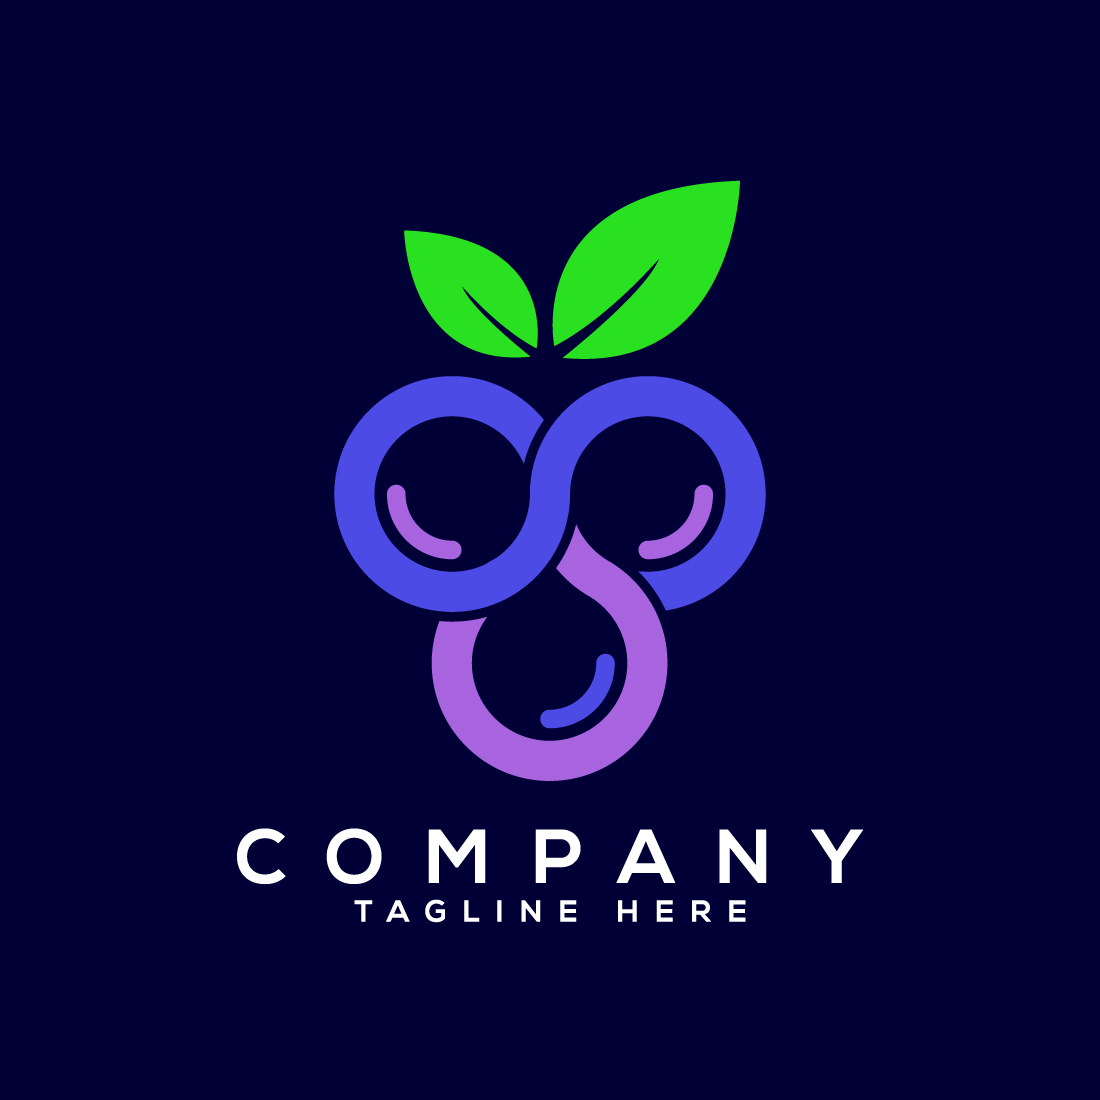 Abstract Blueberry logo design vector template cover image.